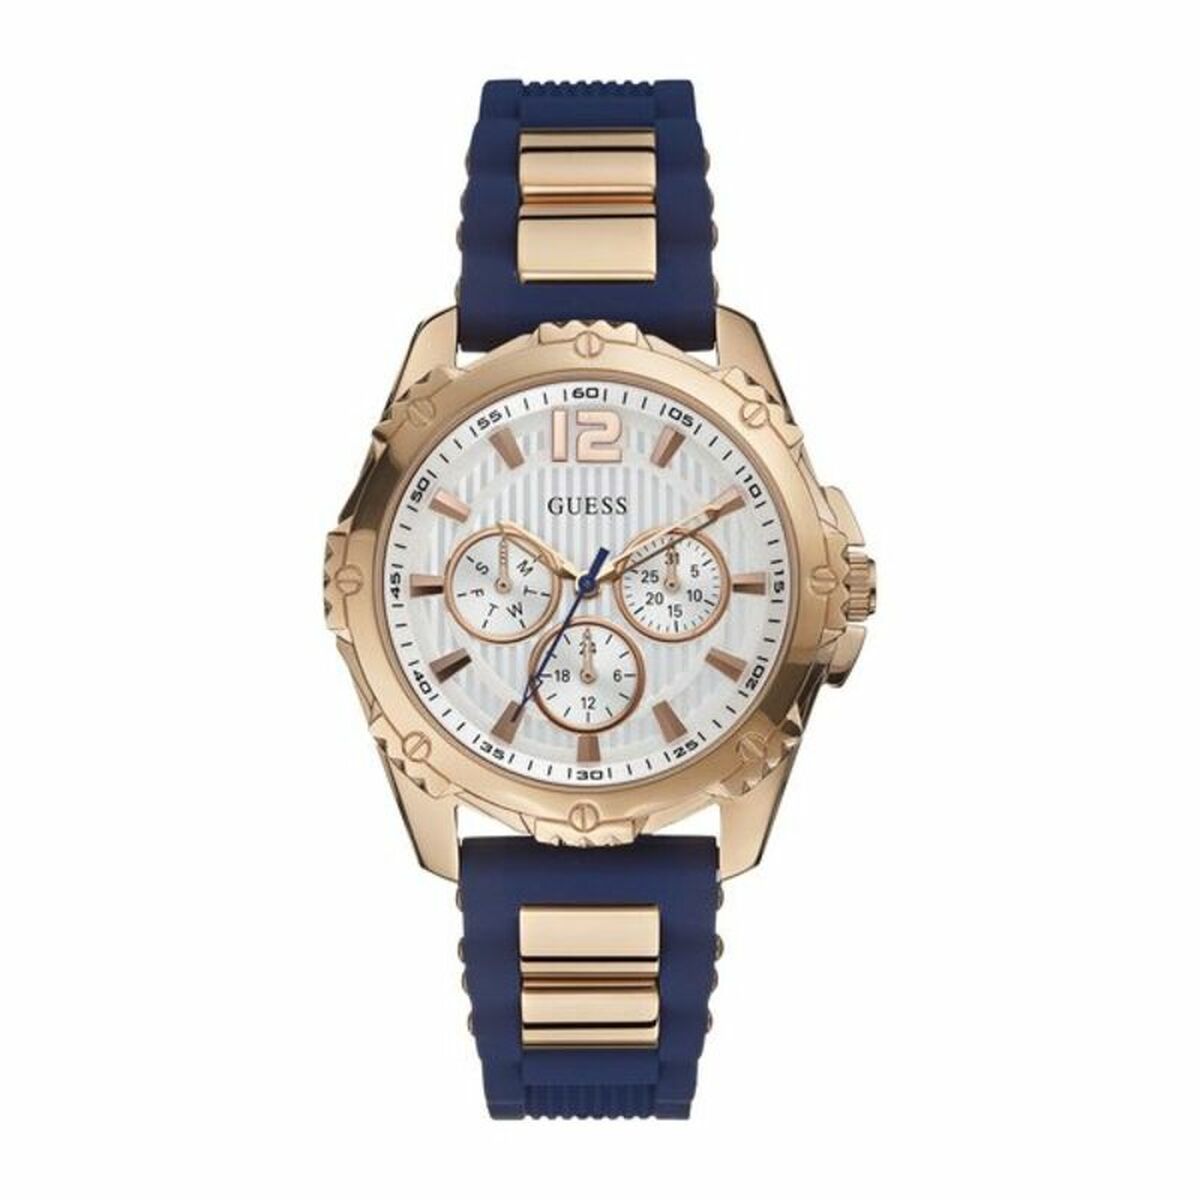 Ladies' Watch Guess W0325L8 (36 mm), Guess, Watches, Women, ladies-watch-guess-w0325l8-36-mm, Brand_Guess, category-reference-2570, category-reference-2635, category-reference-2662, category-reference-2682, category-reference-2995, category-reference-t-19667, category-reference-t-19725, Condition_NEW, fashion, original gifts, Price_100 - 200, RiotNook